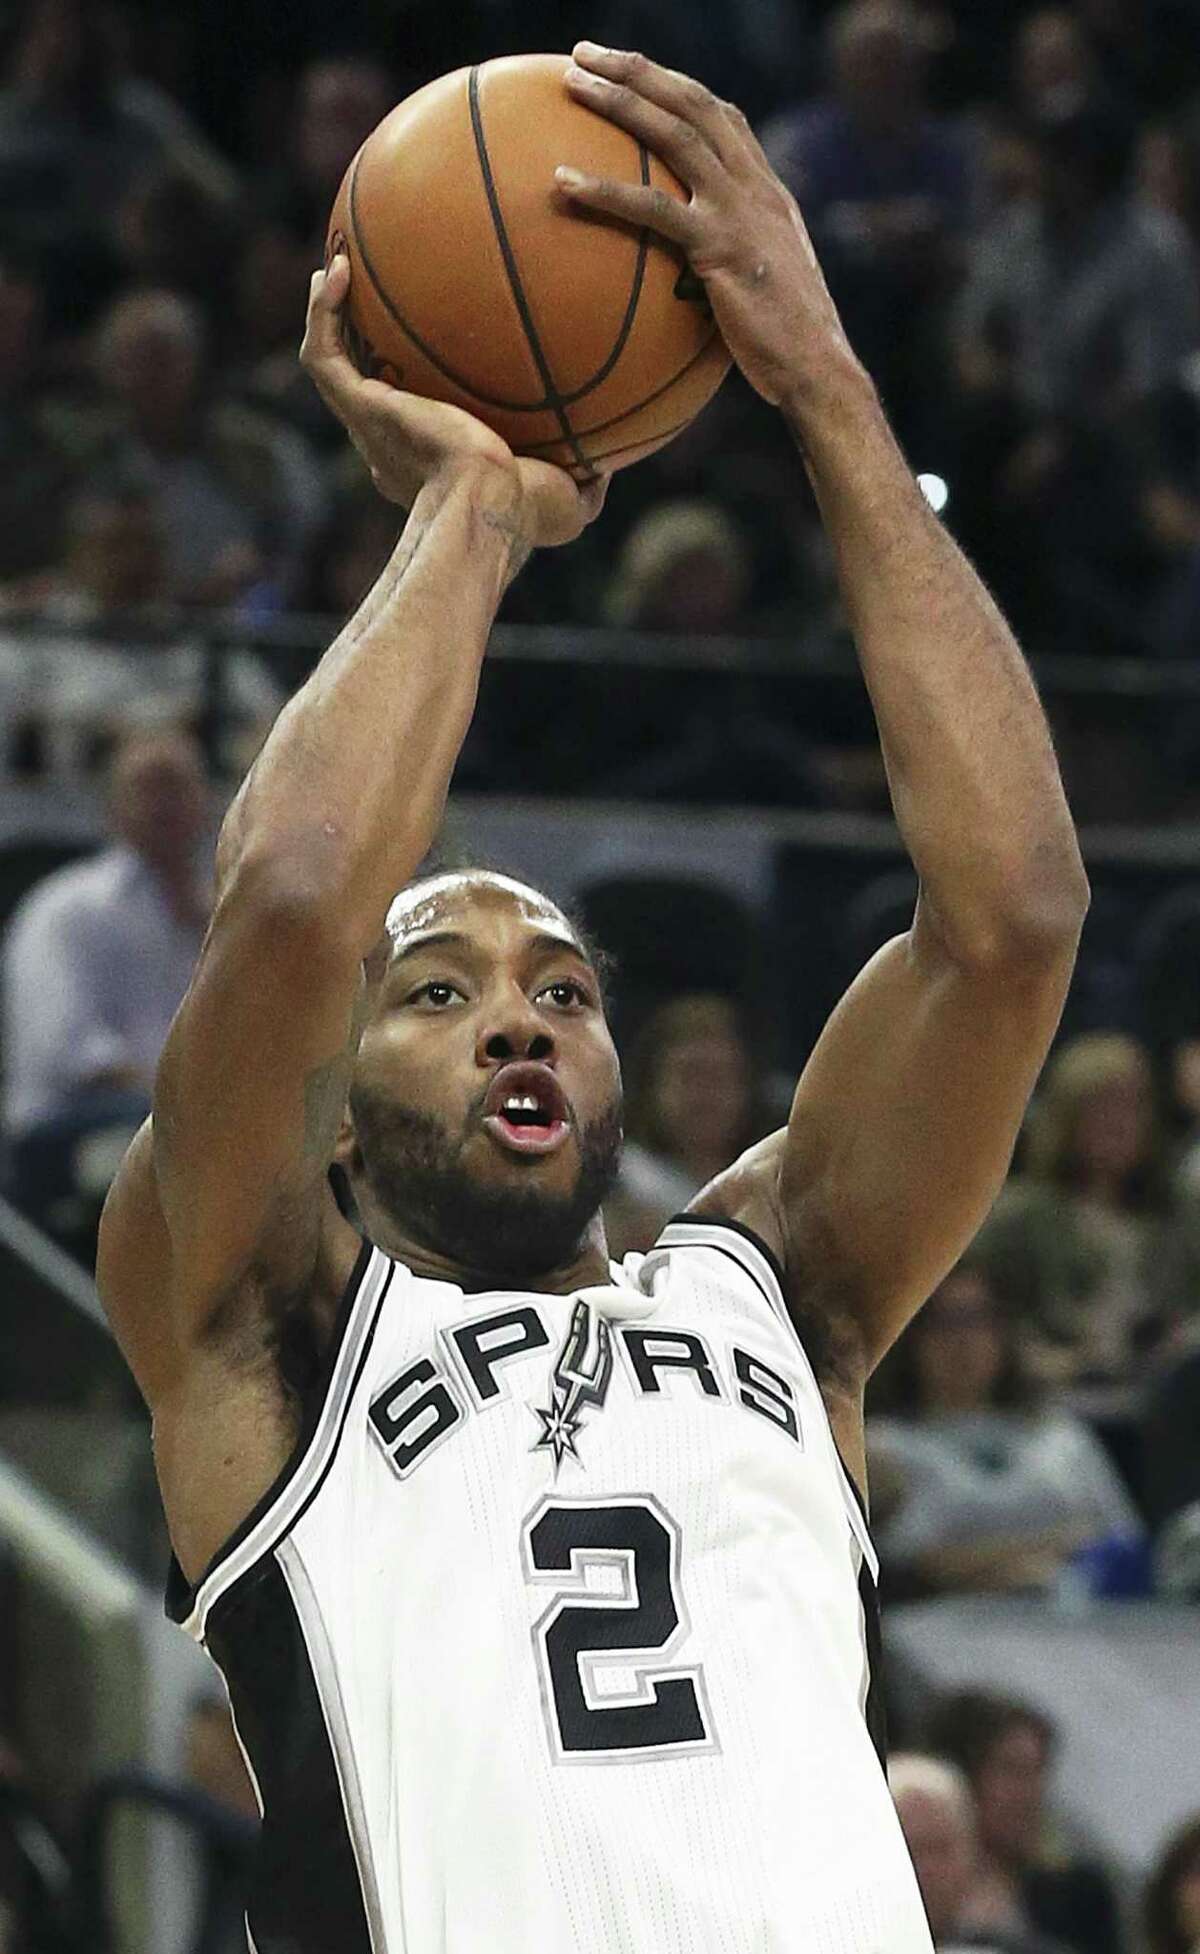 Kawhi Leonard takes a shot during a productive first half as the Spurs play the Raptors at the AT&T Center on Jan. 3.